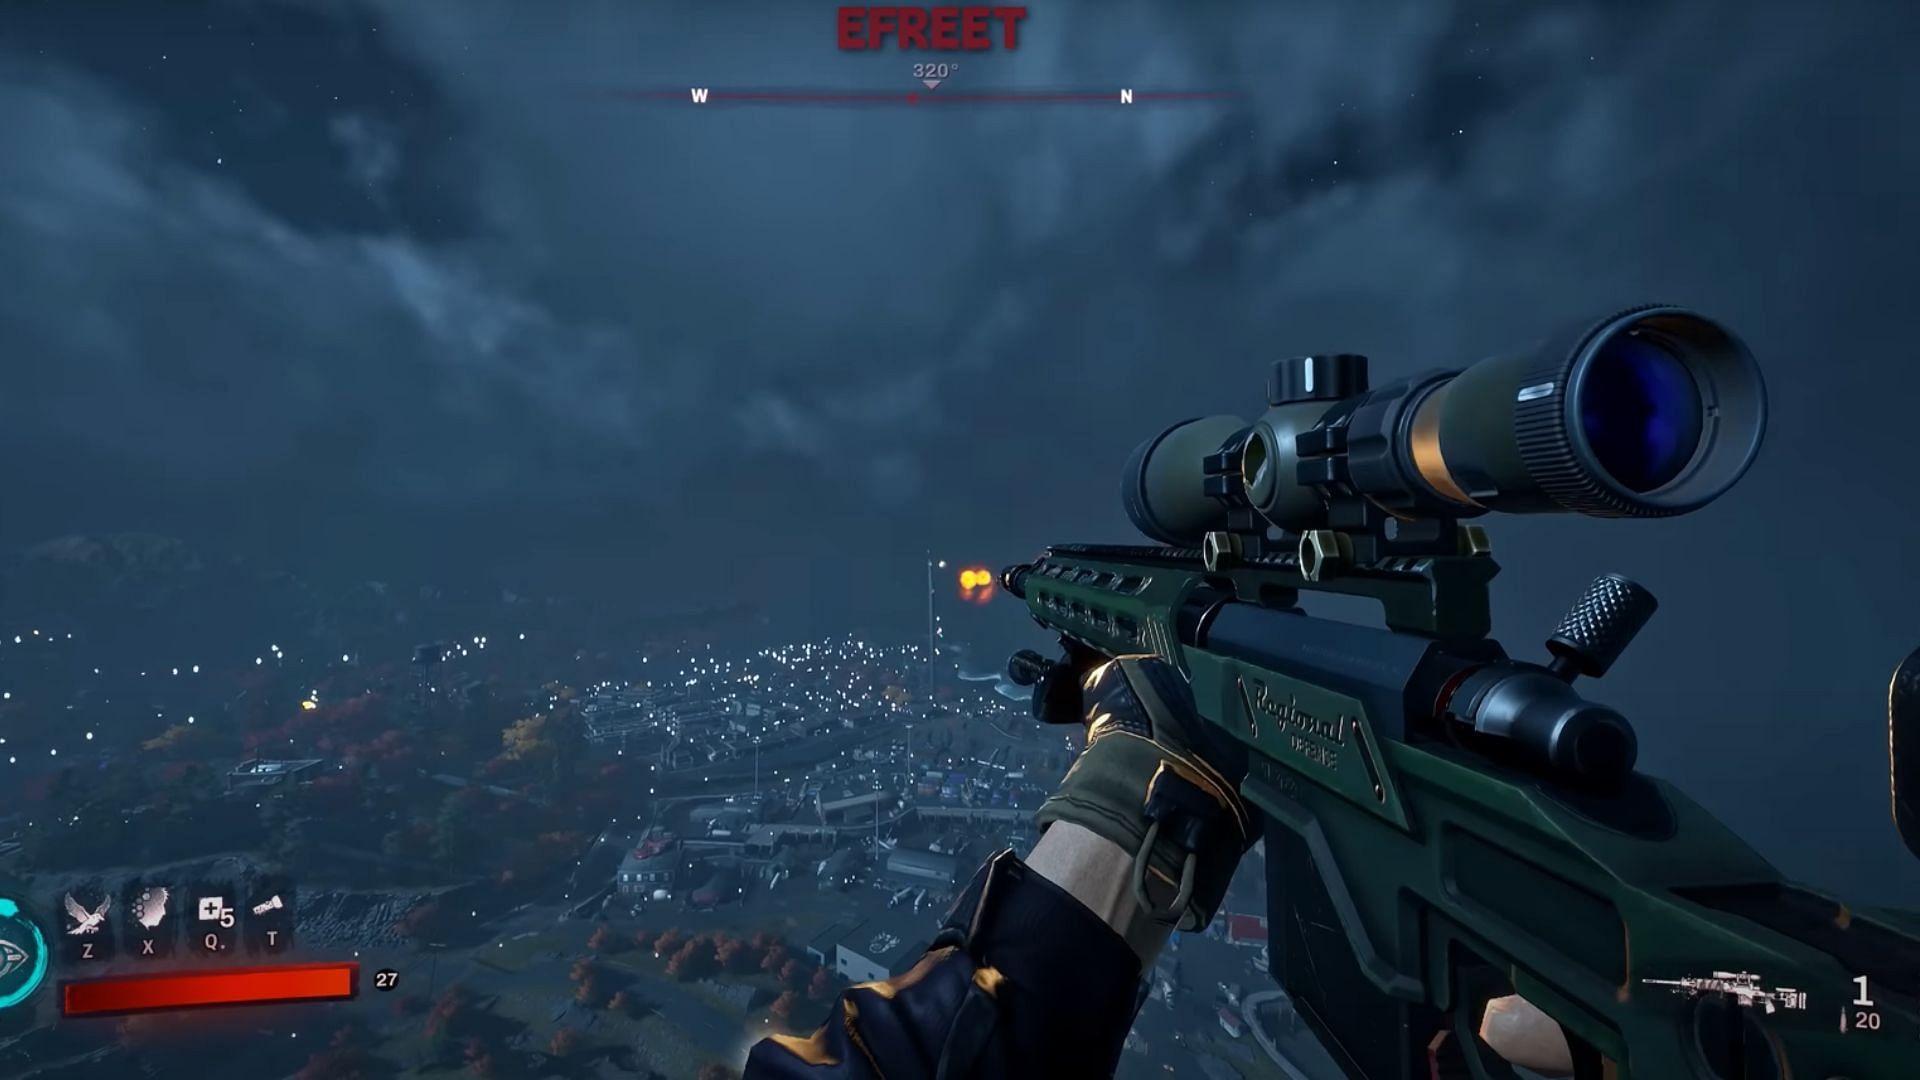 Redfall update 3 adds new sniper rifle, fixes performance issues